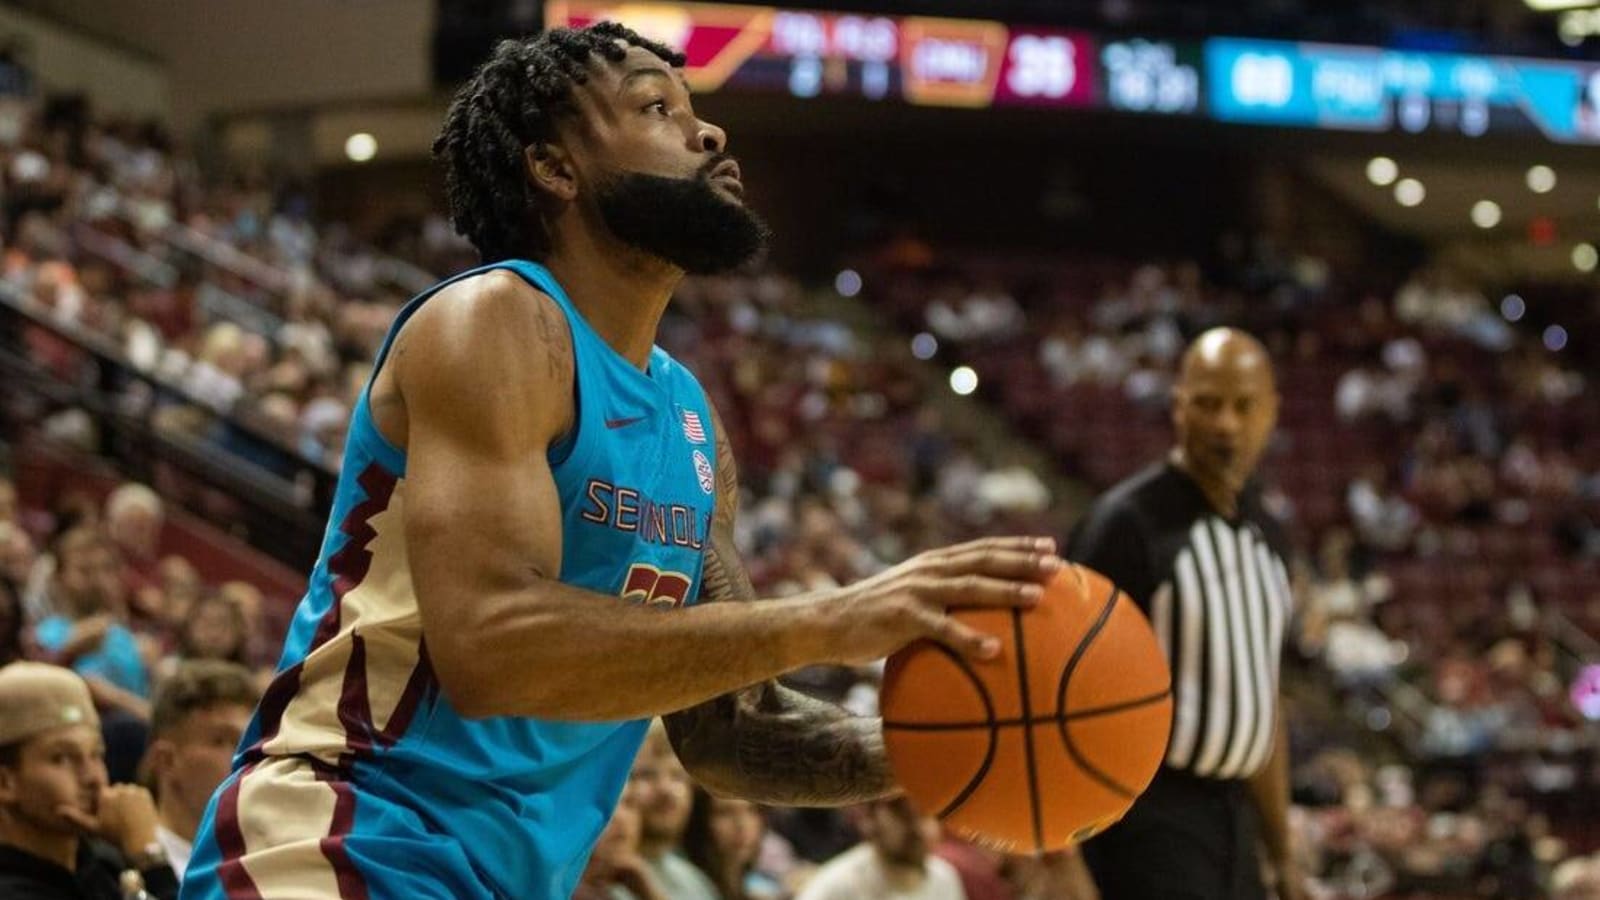 Florida State counting on Darin Green Jr. in matchup vs. Winthrop